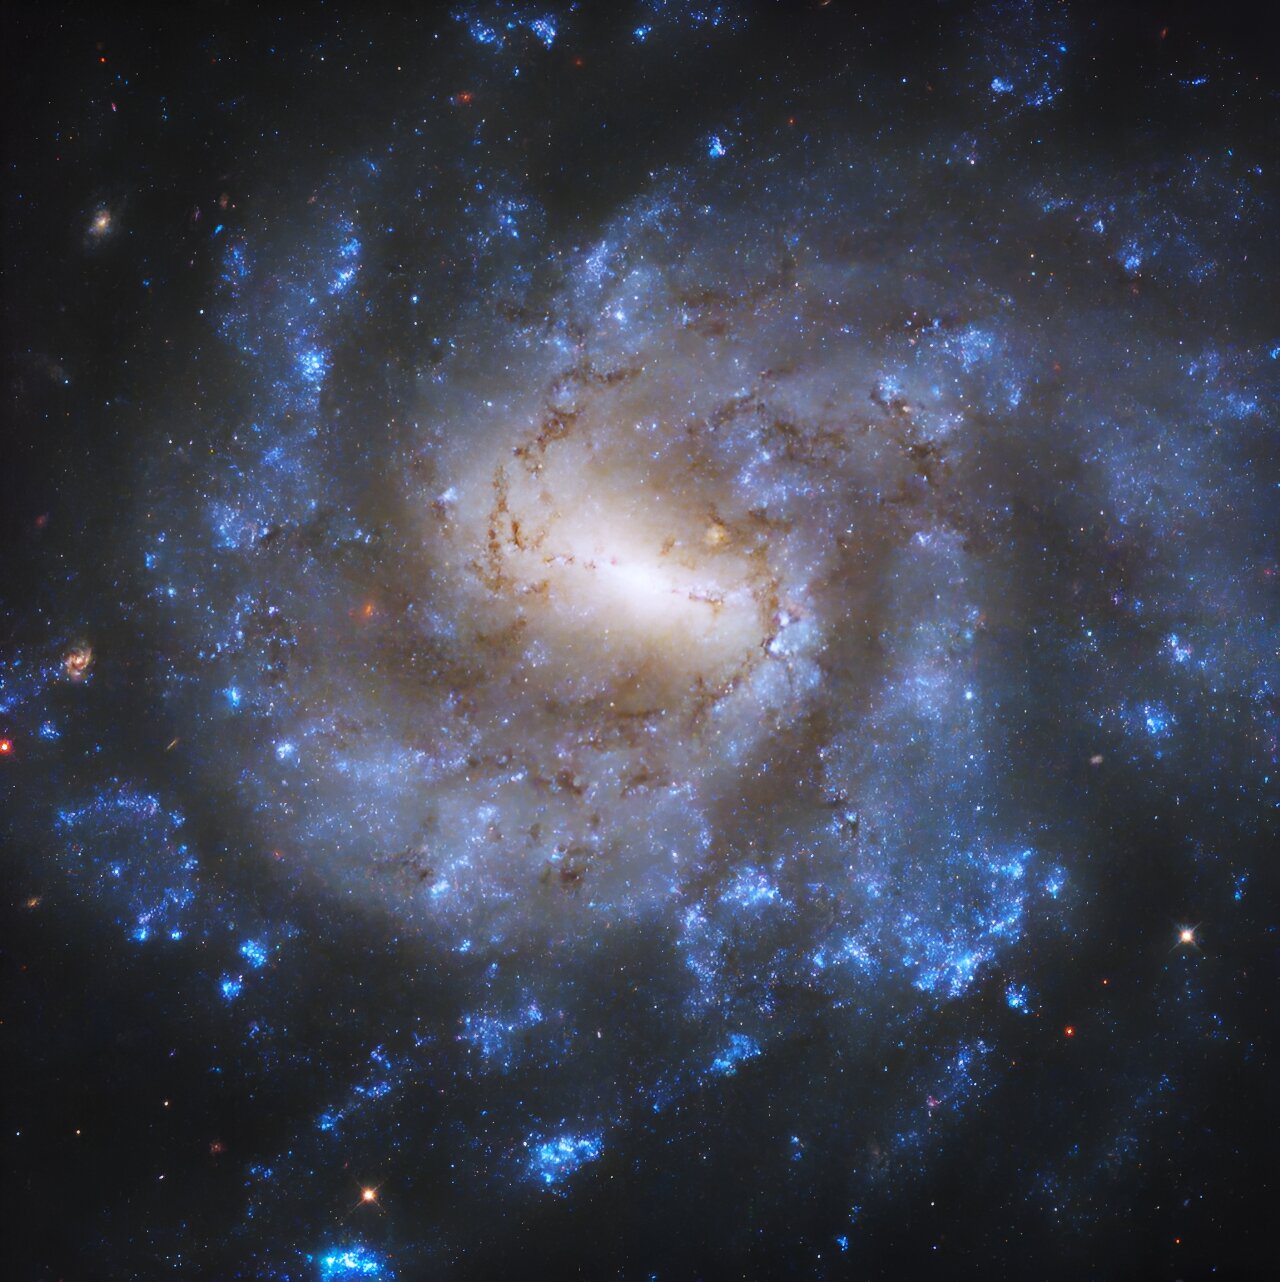 Hubble Captures NGC 685, a Barred Spiral Galaxy